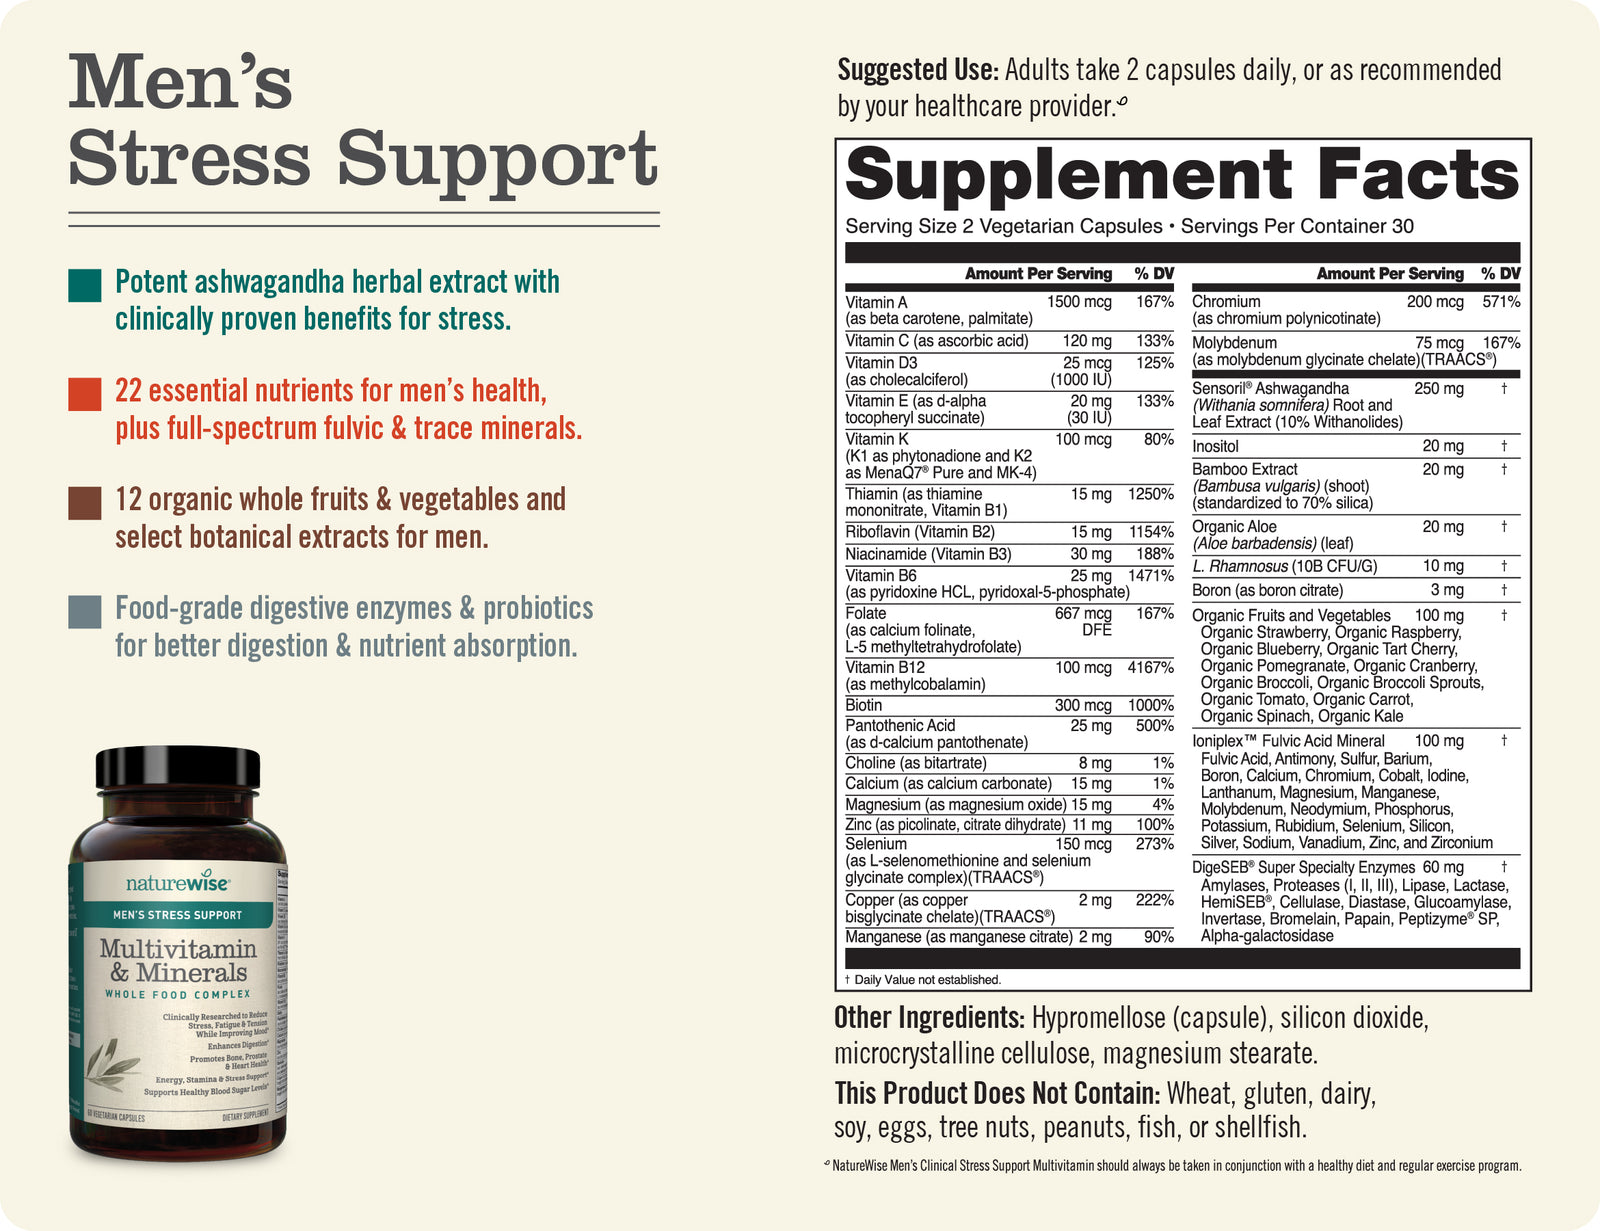 Men's Multivitamin with Stress Support Sup Facts June 22